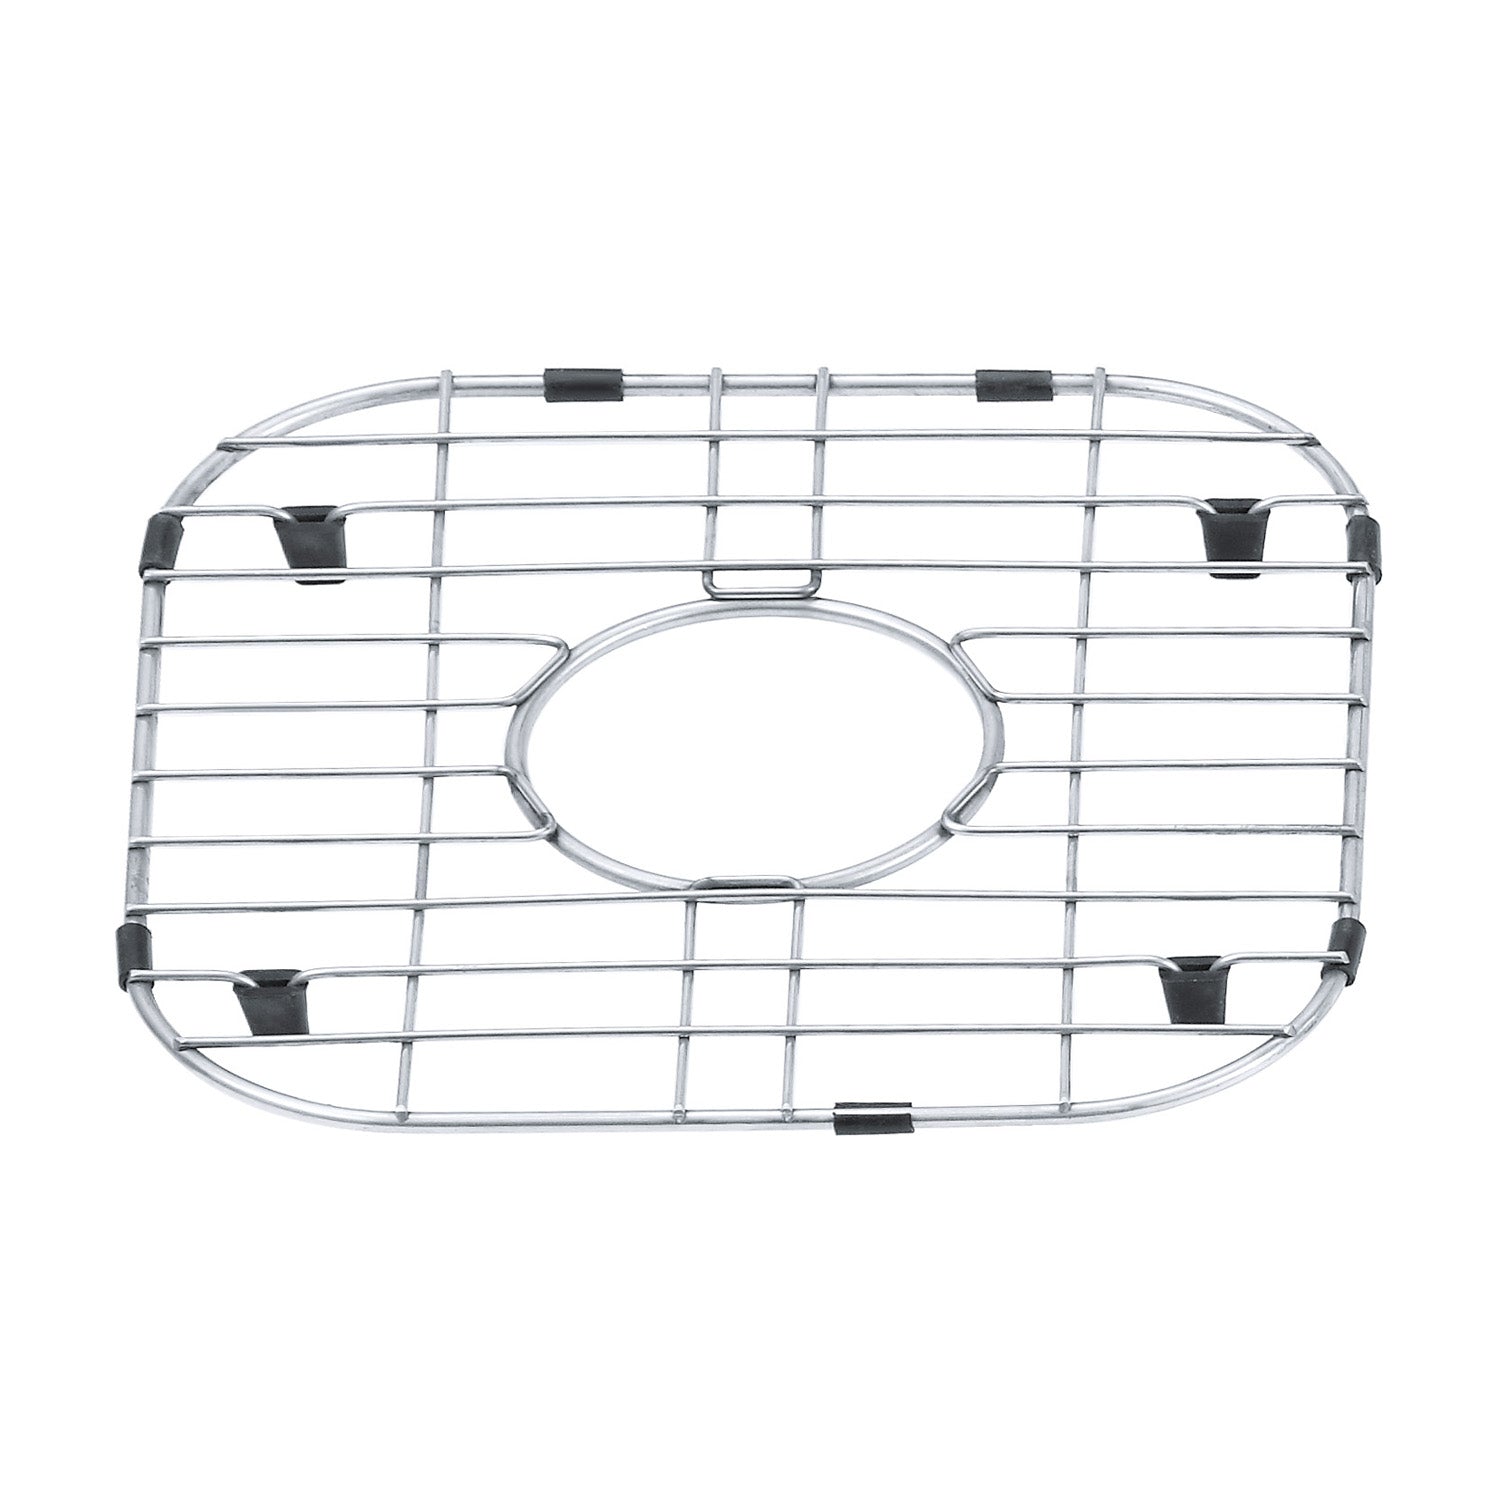 DAX Grid for Bar Sink, Stainless Steel Body, Chrome Finish, Compatible with DAX-1214, 11-3/4 x 10-1/4 Inches (GRID-1214)